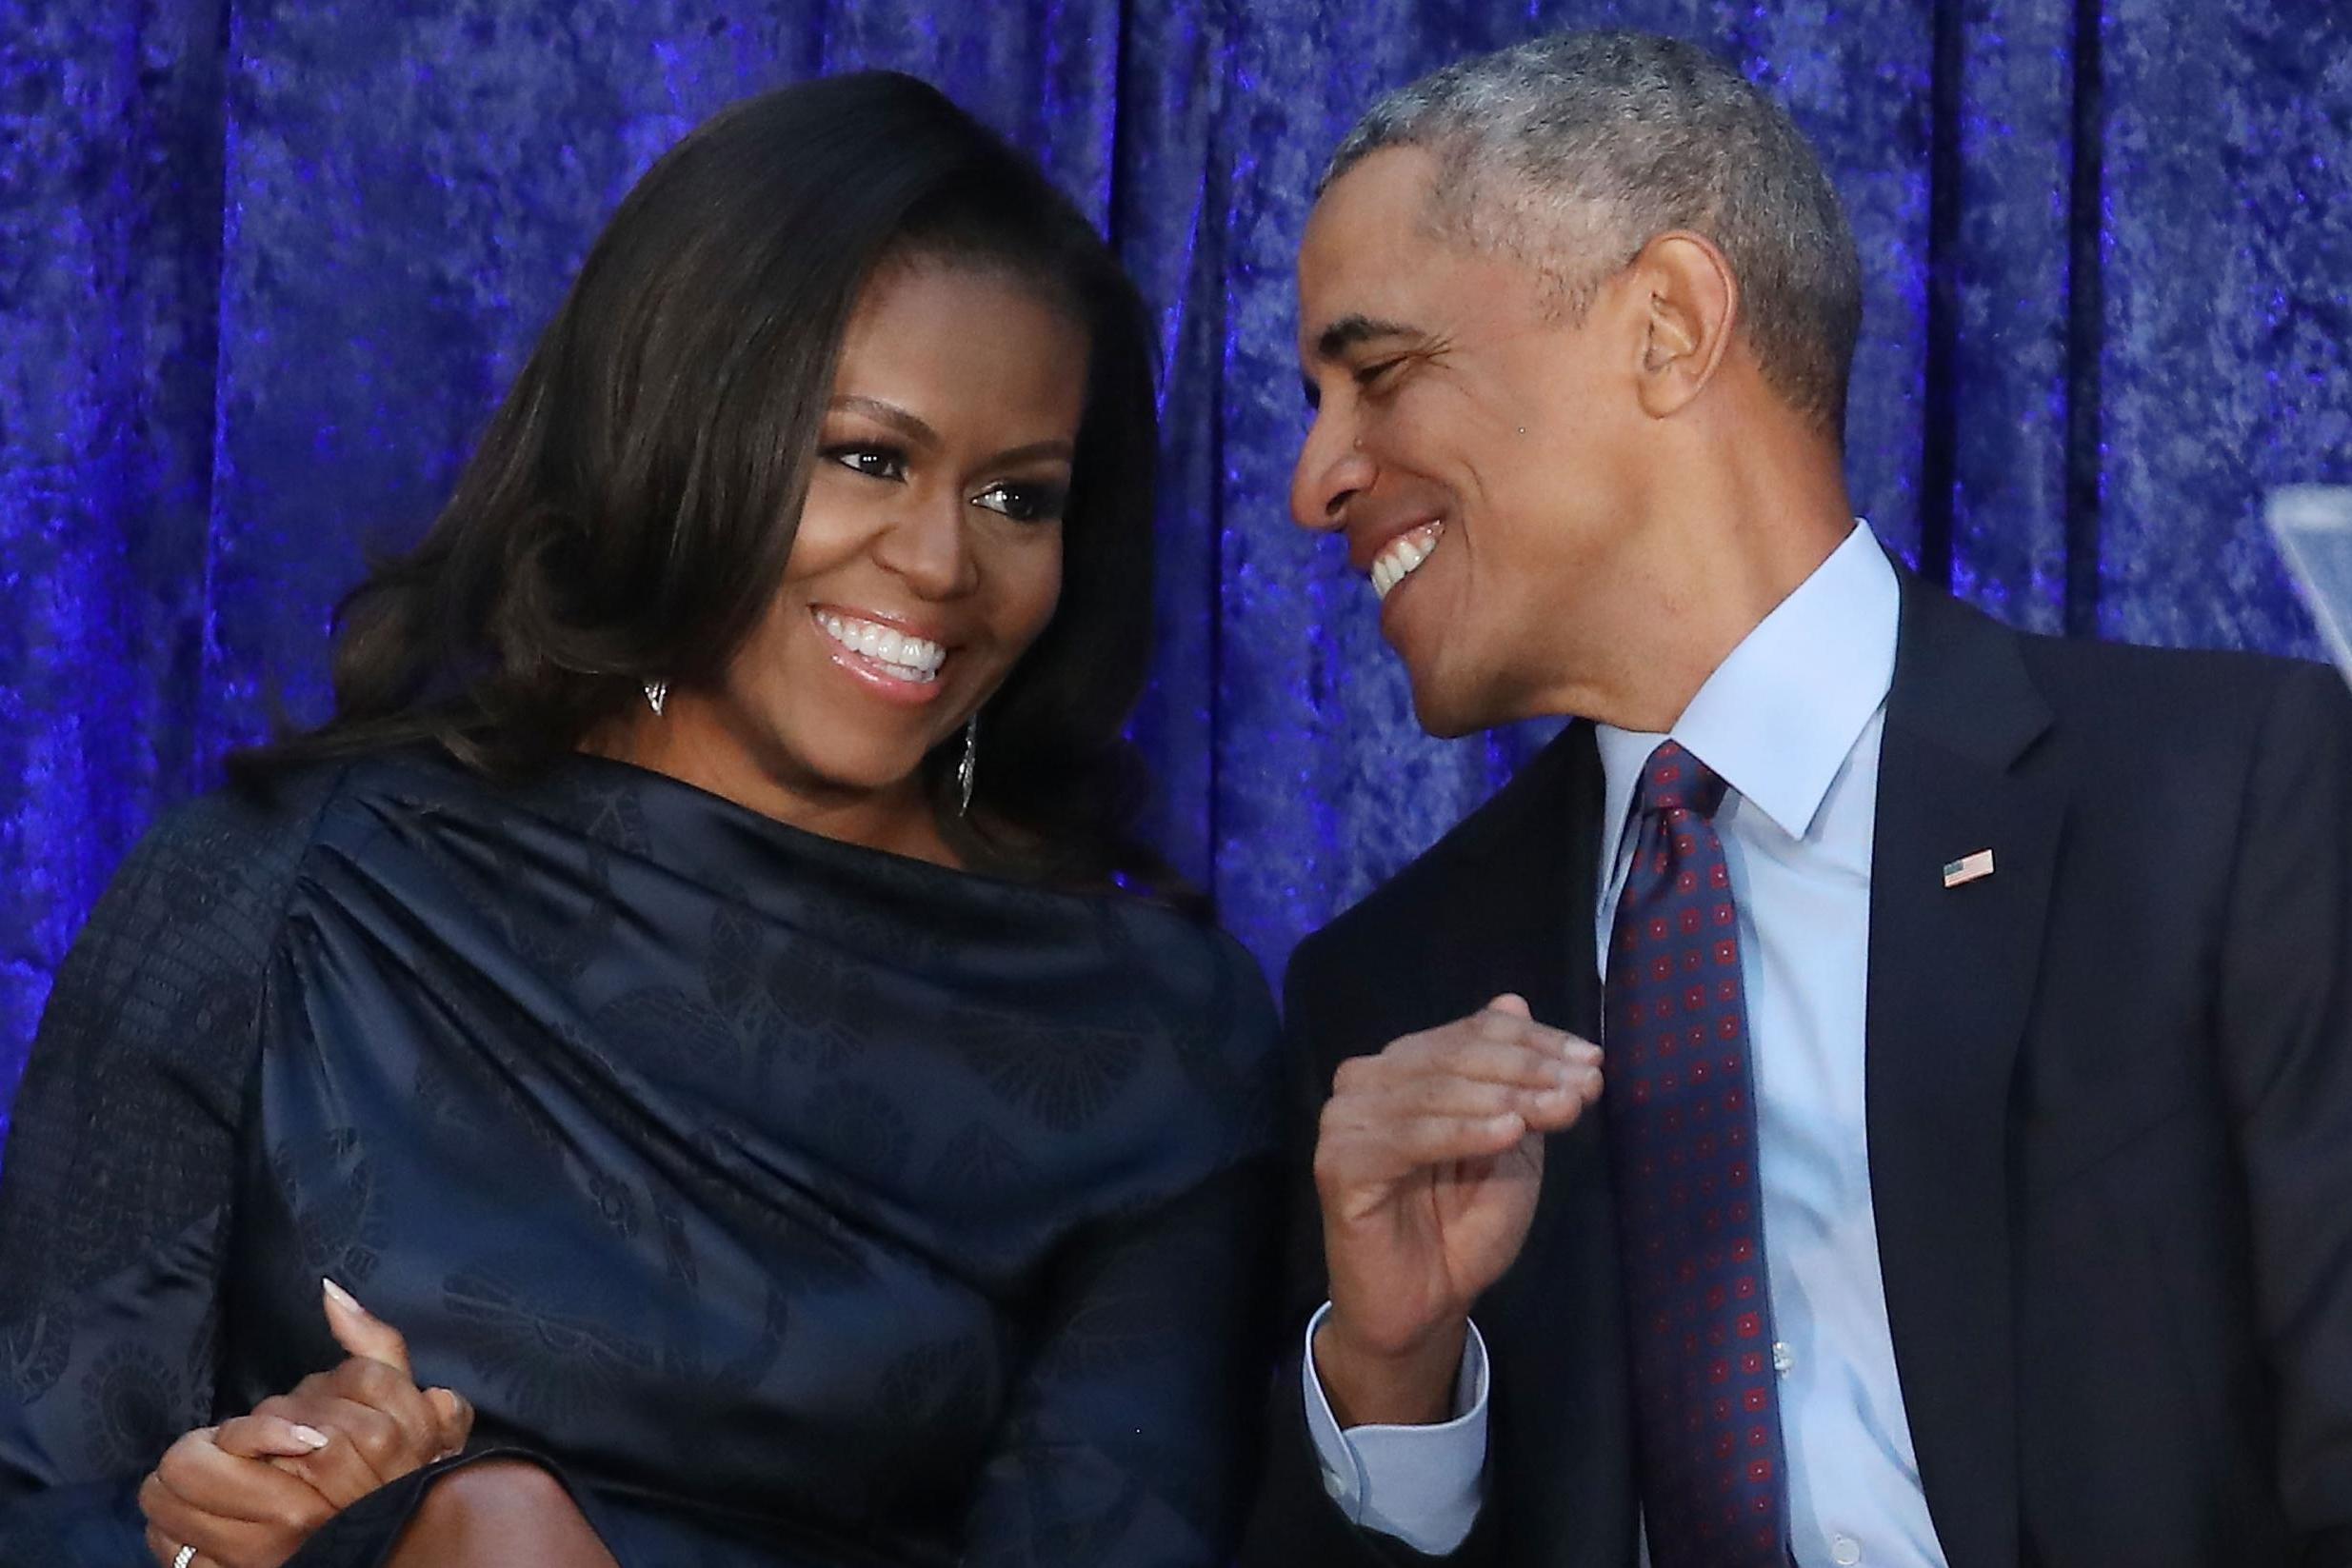 michelle-obama-shares-her-advice-for-a-lasting-marriage-you-cant-tinder-your-way-into-a-longterm-relationship